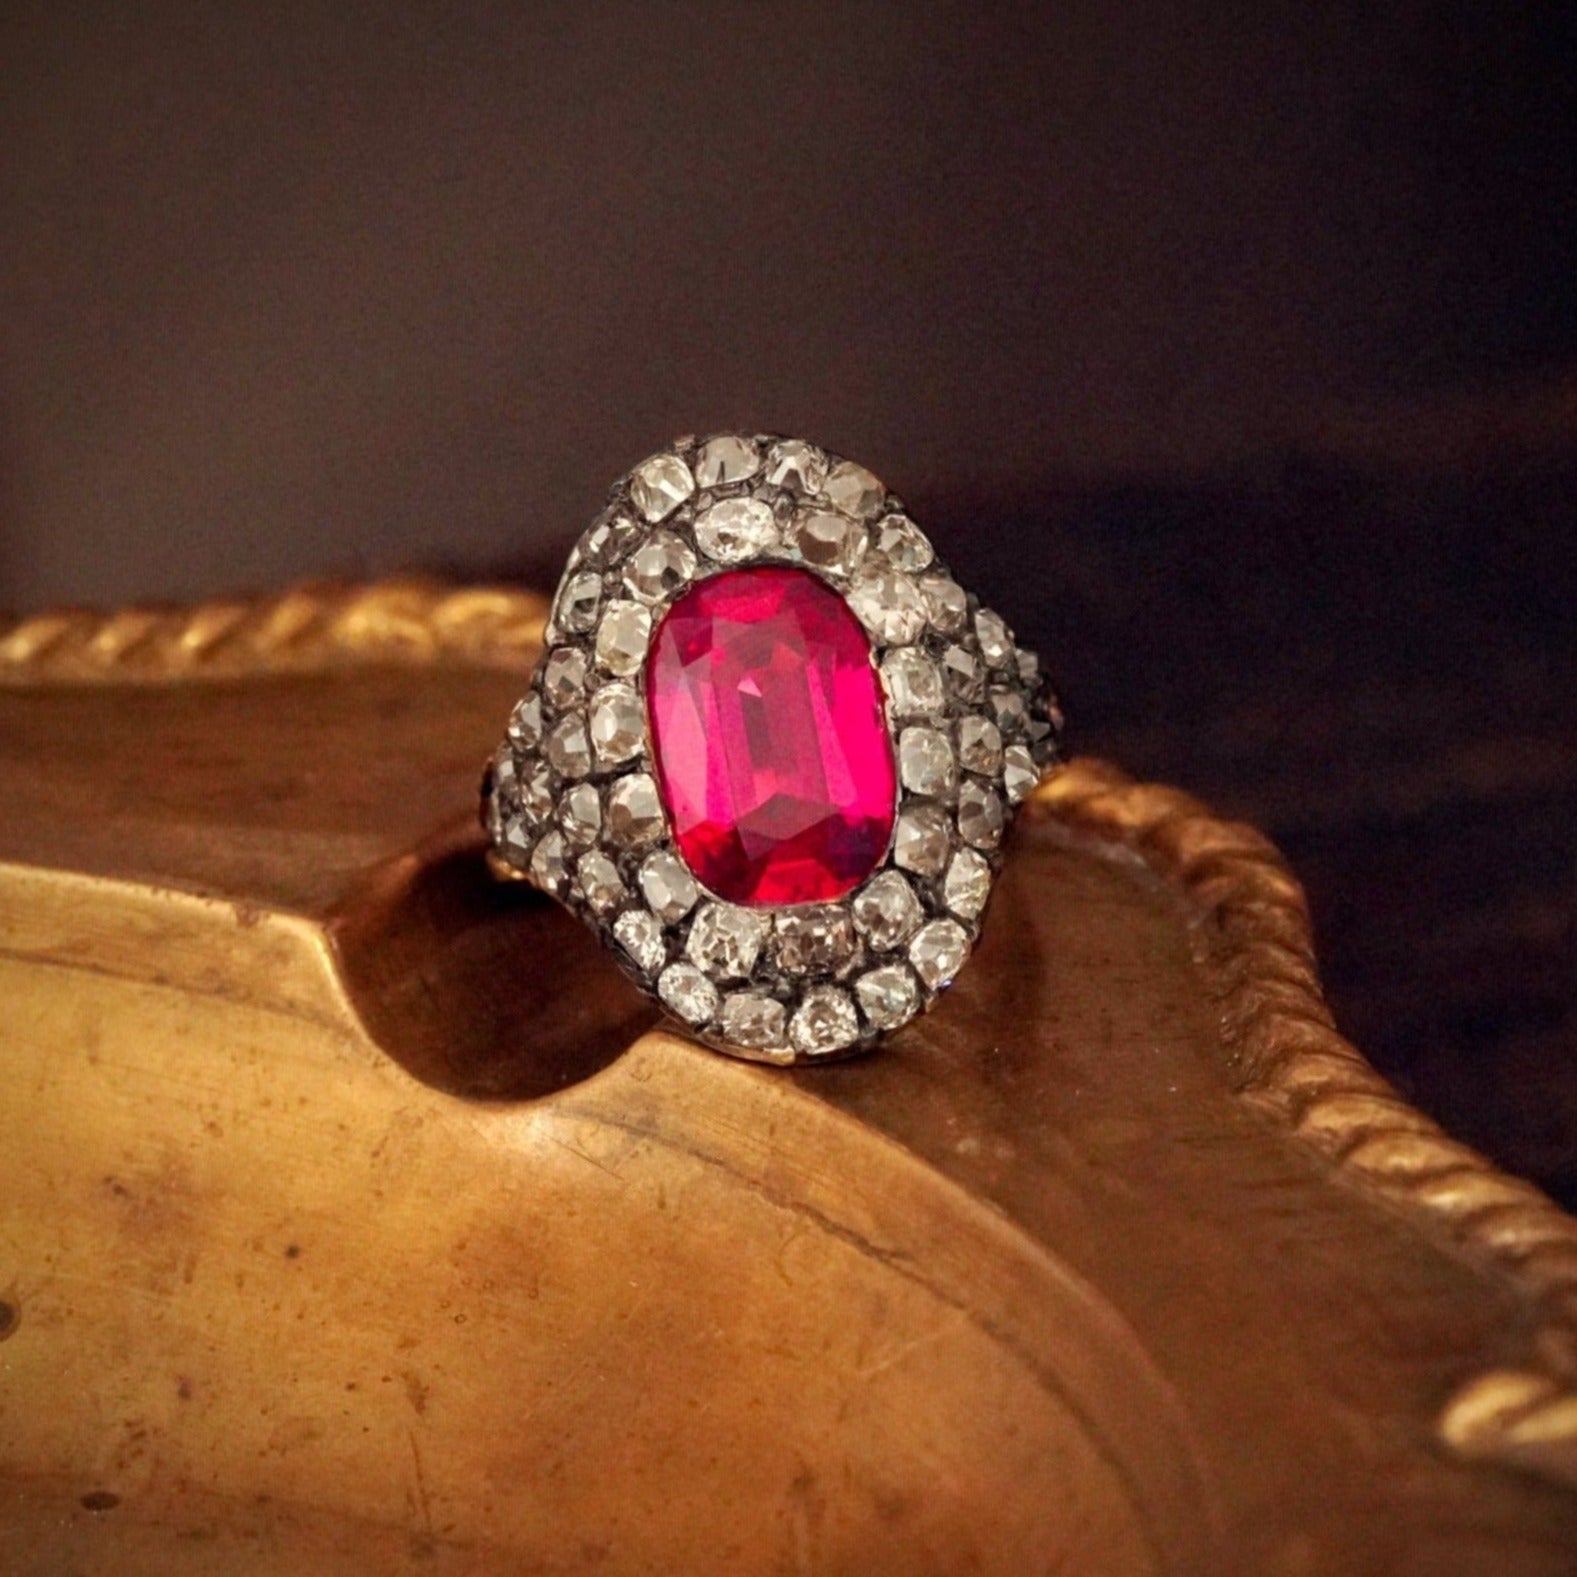 Jogani Gallery Exquisite Georgian Era Ring with a Glowing 3.12 CT No Heat Burmese Ruby and Lustrous  